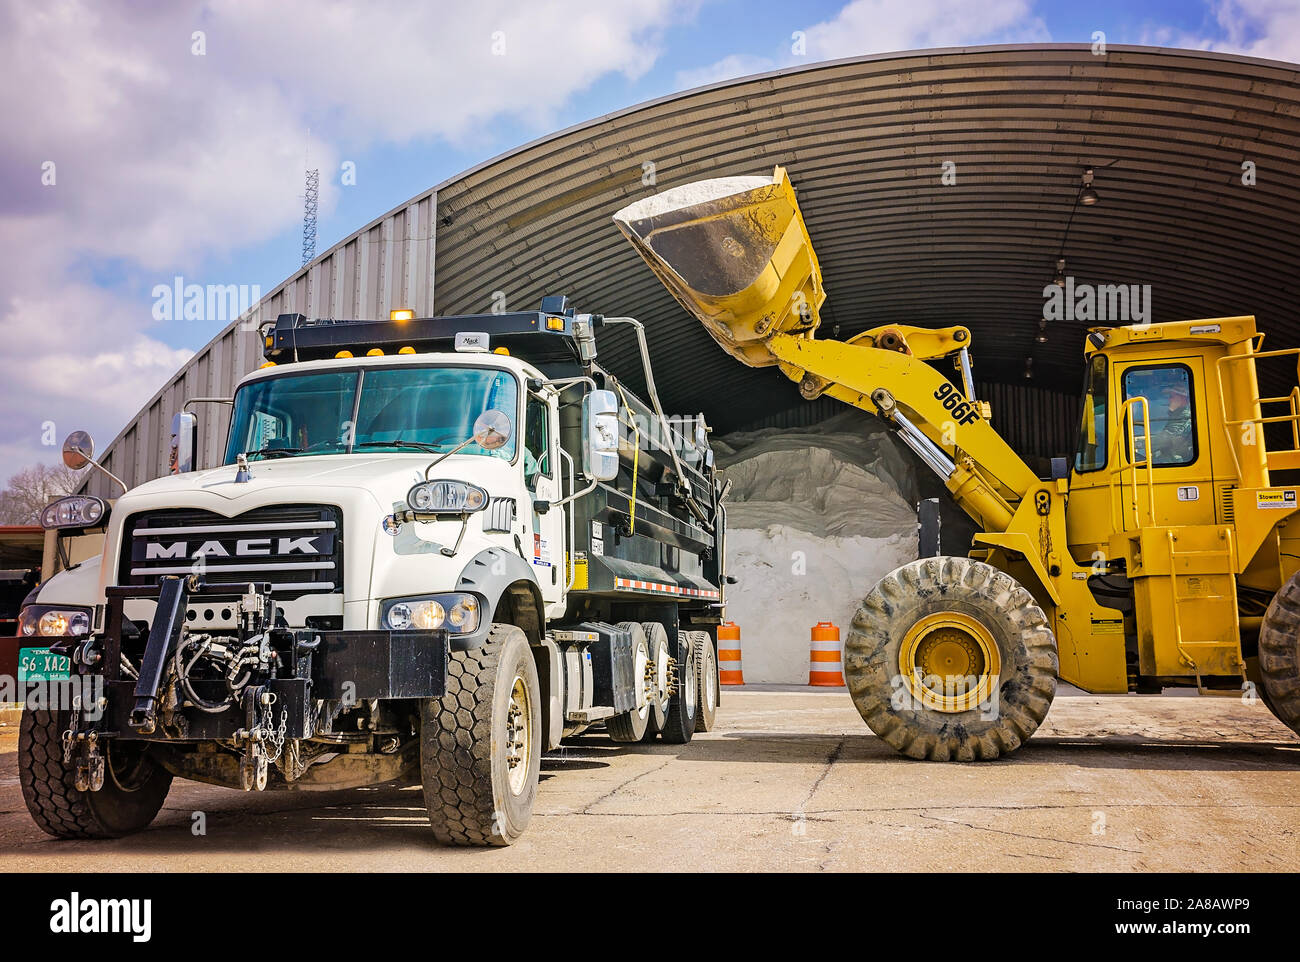 A Mack Granite is loaded with salt at the Tennessee Department of Transportation’s salt barns, March 13, 2018, in Knoxville, Tennessee. Stock Photo